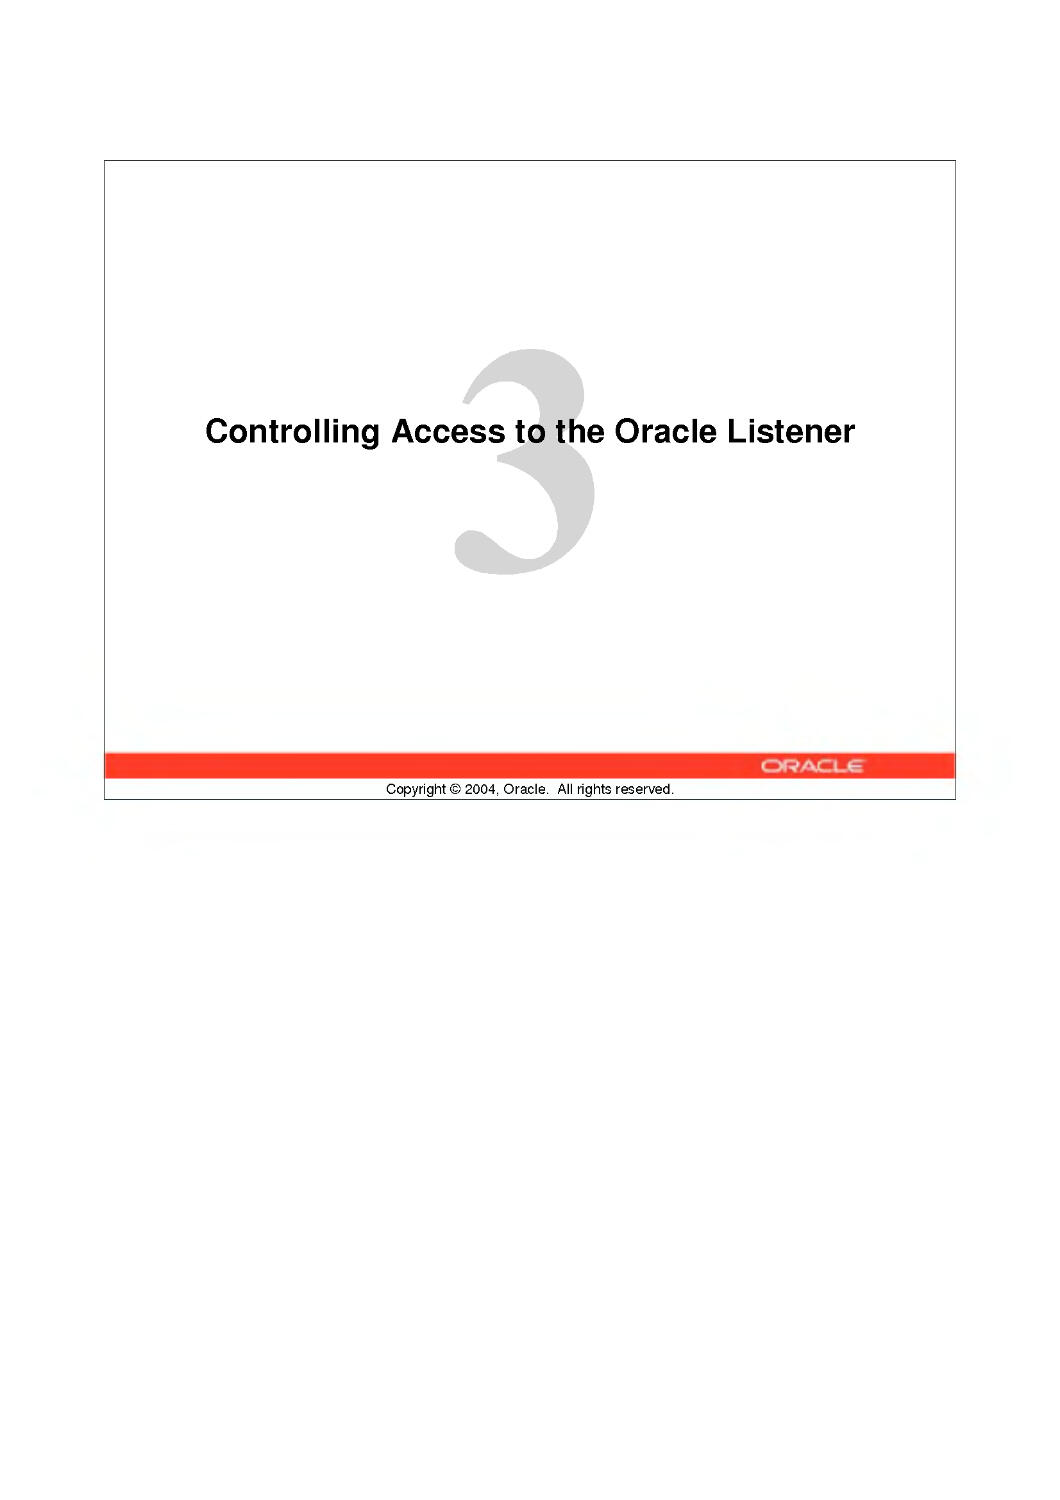 3 Controlling Access to the Oracle Listener